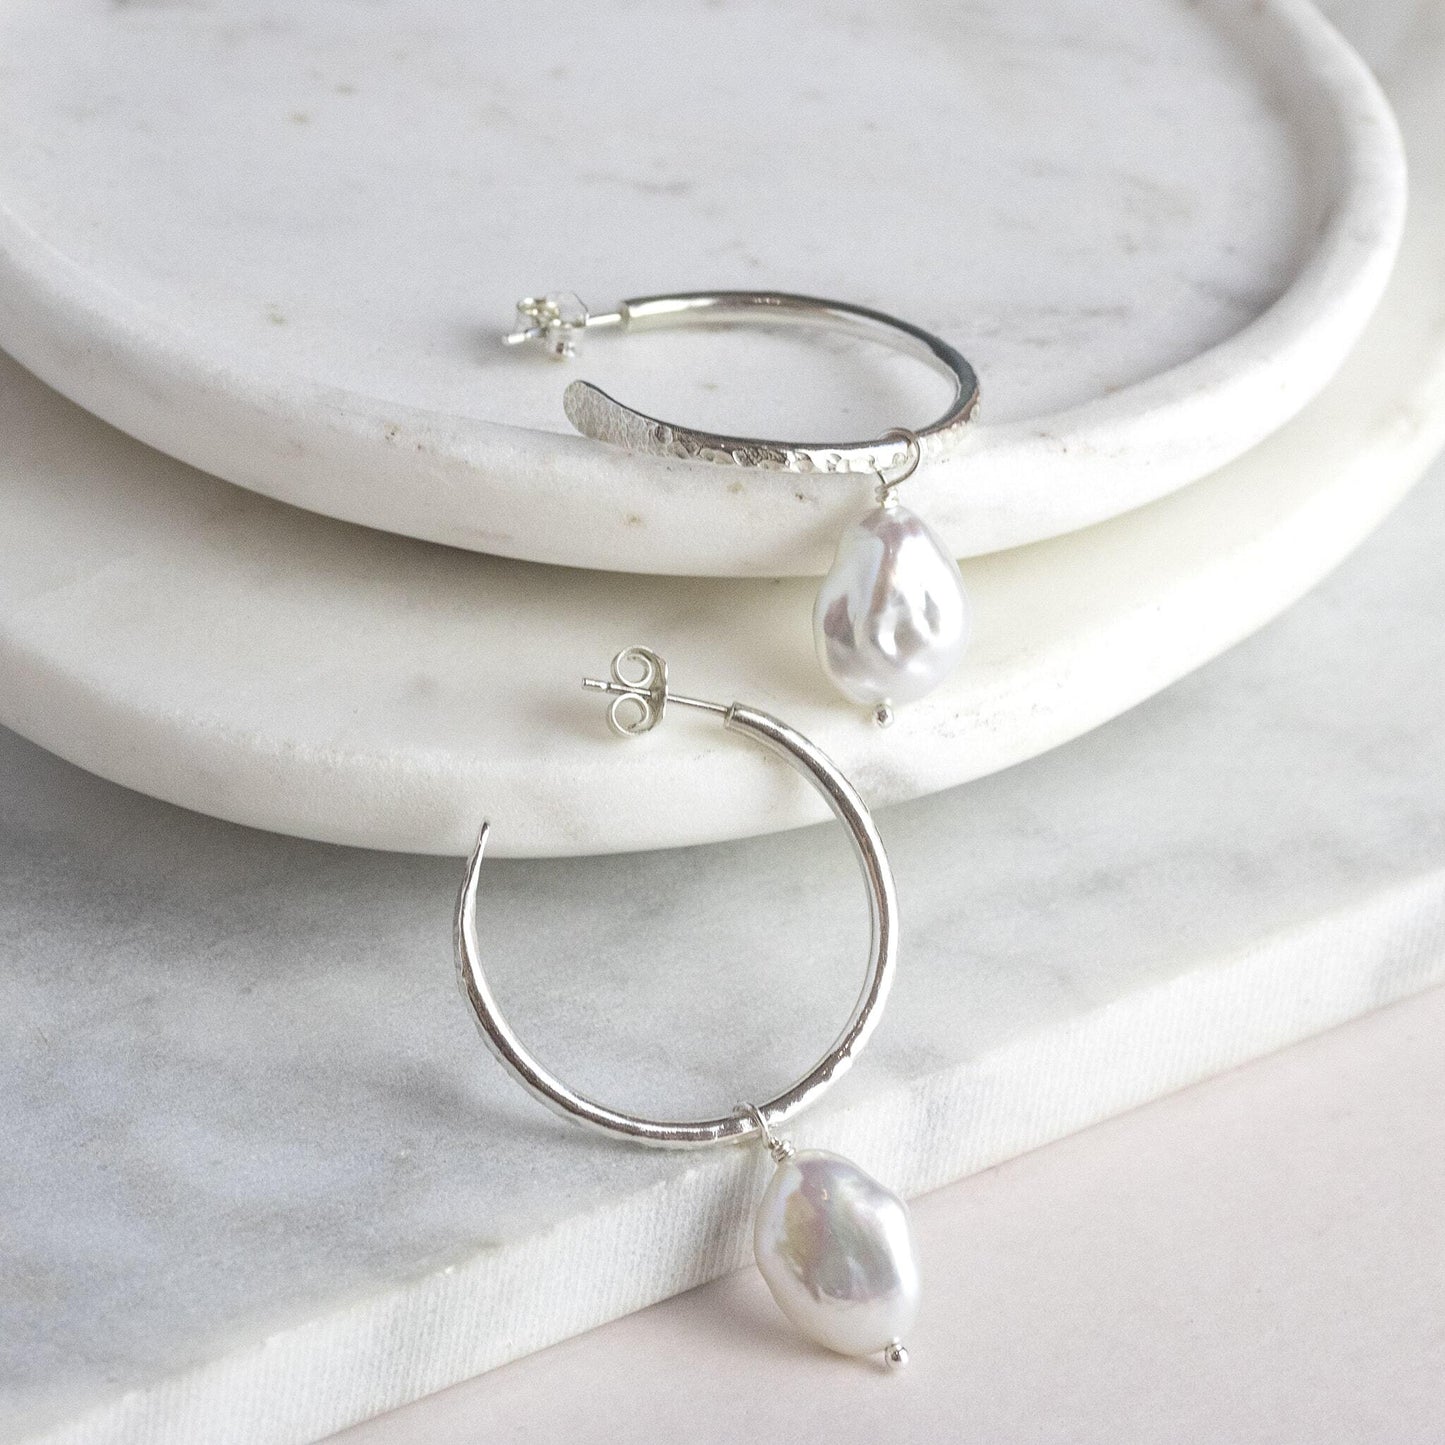 Small Silver Hoop Earrings with Pearls